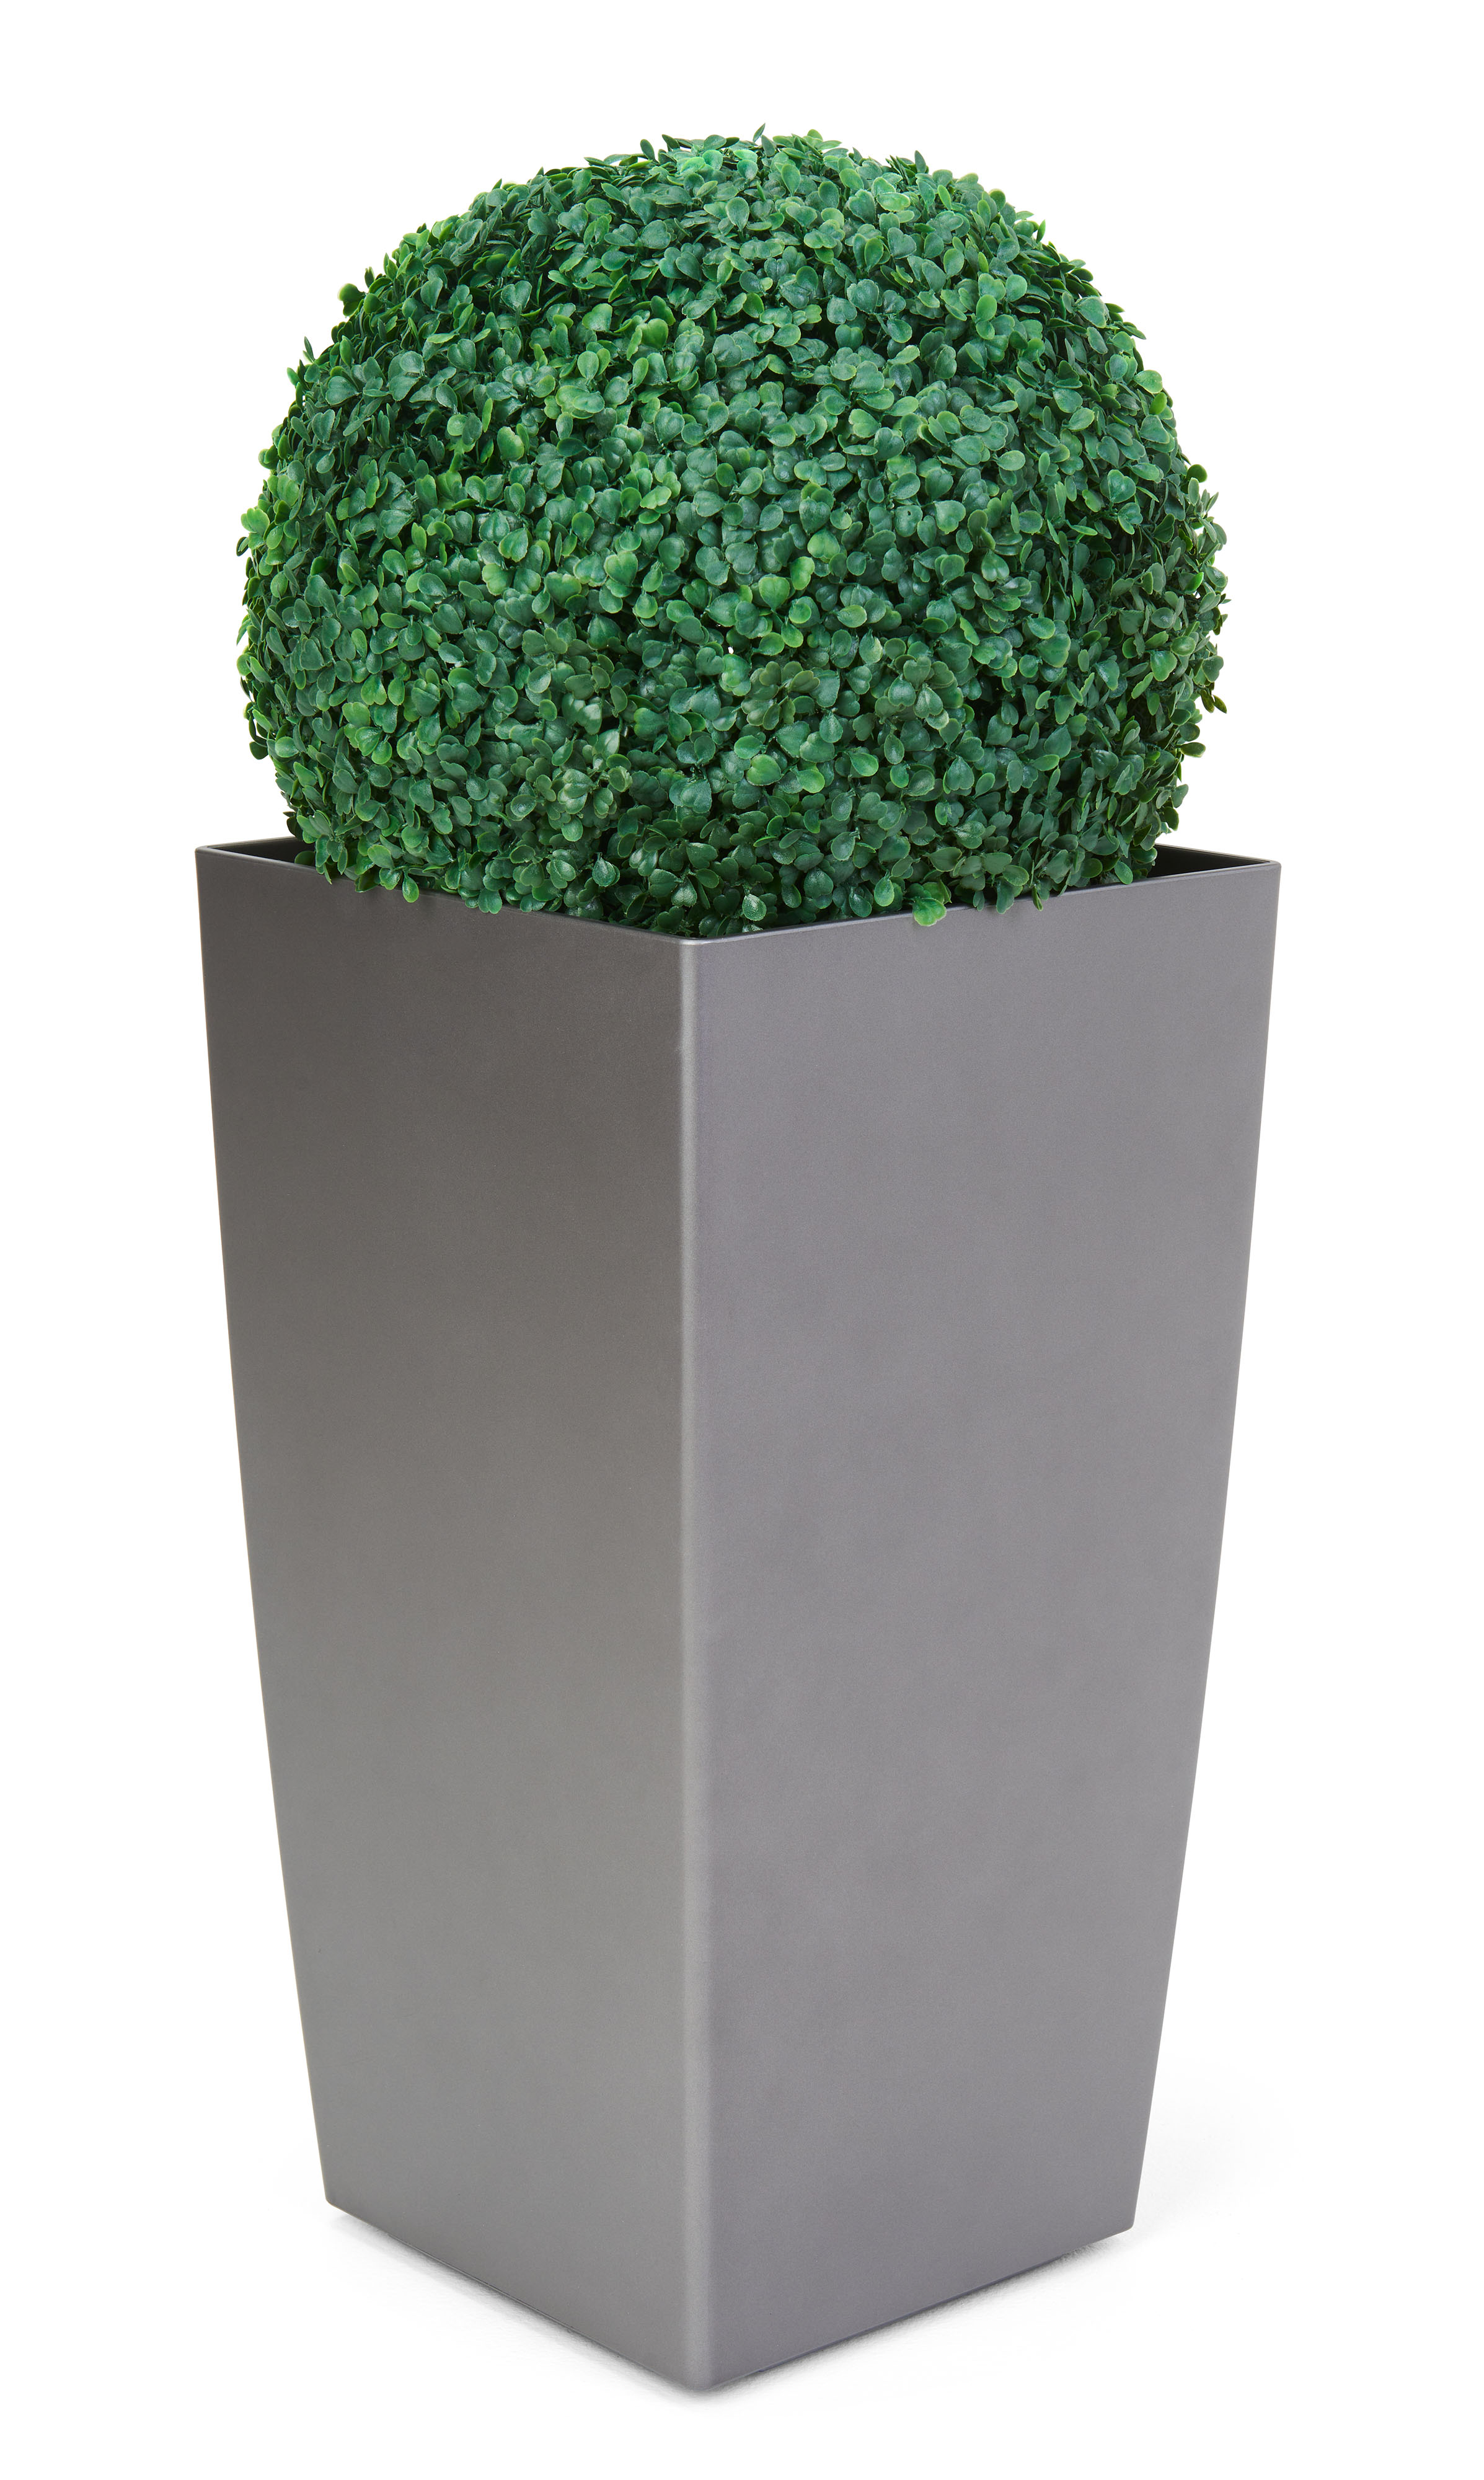 Boxwood Ball, Tall Planter Resin, Faux Greenery, 52.5, UV RATED for  Outdoor Use!